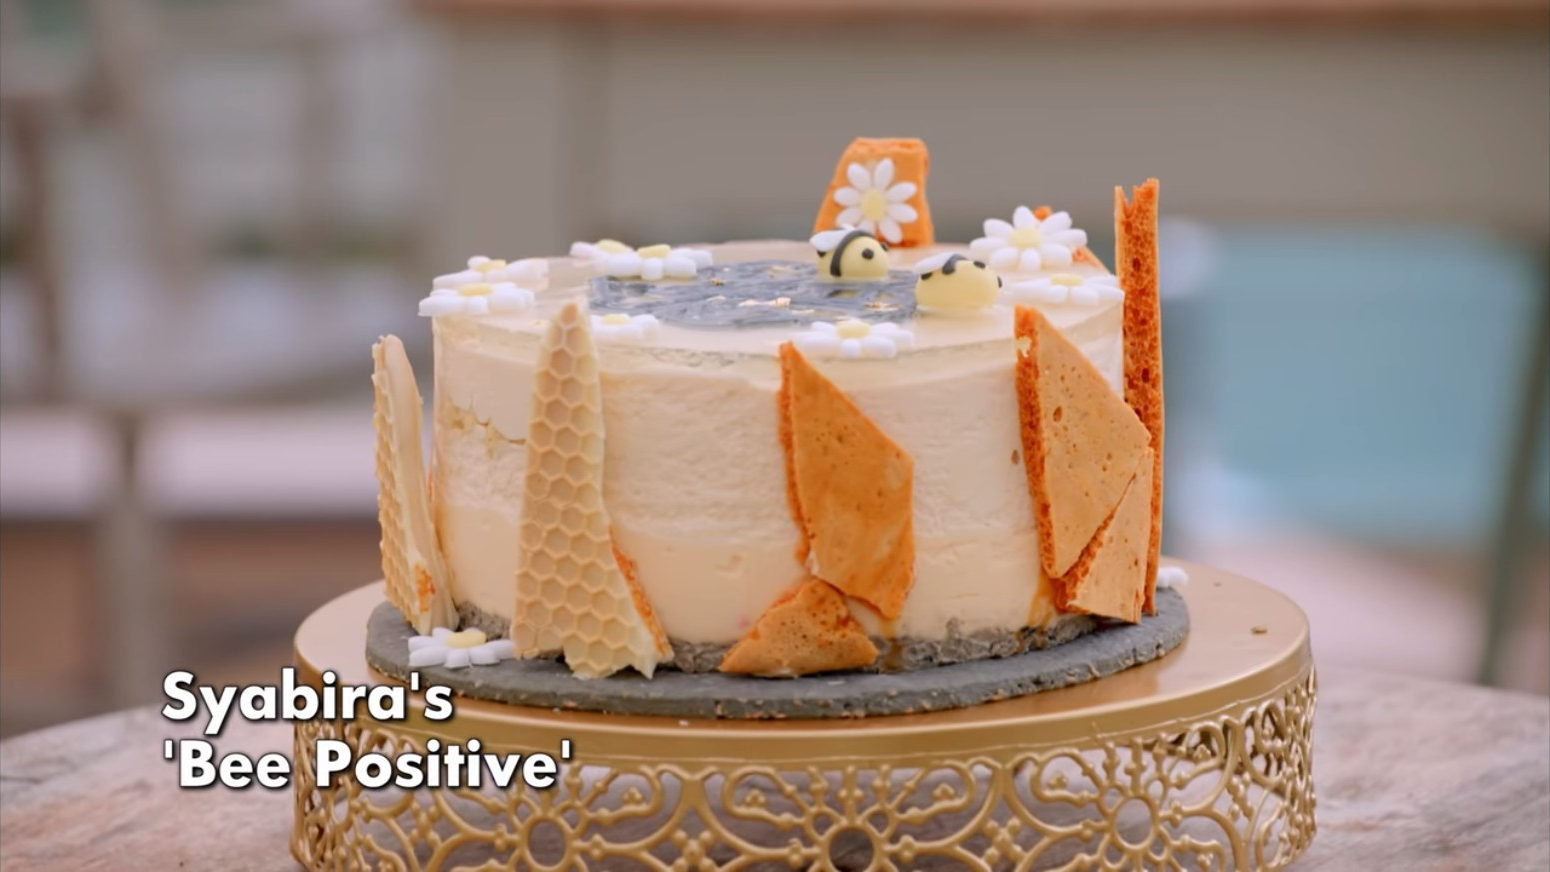 Picture shows: The Great British Baking Show Collection 10 Syabira's Bee Positive Dessert Week Showstopper 